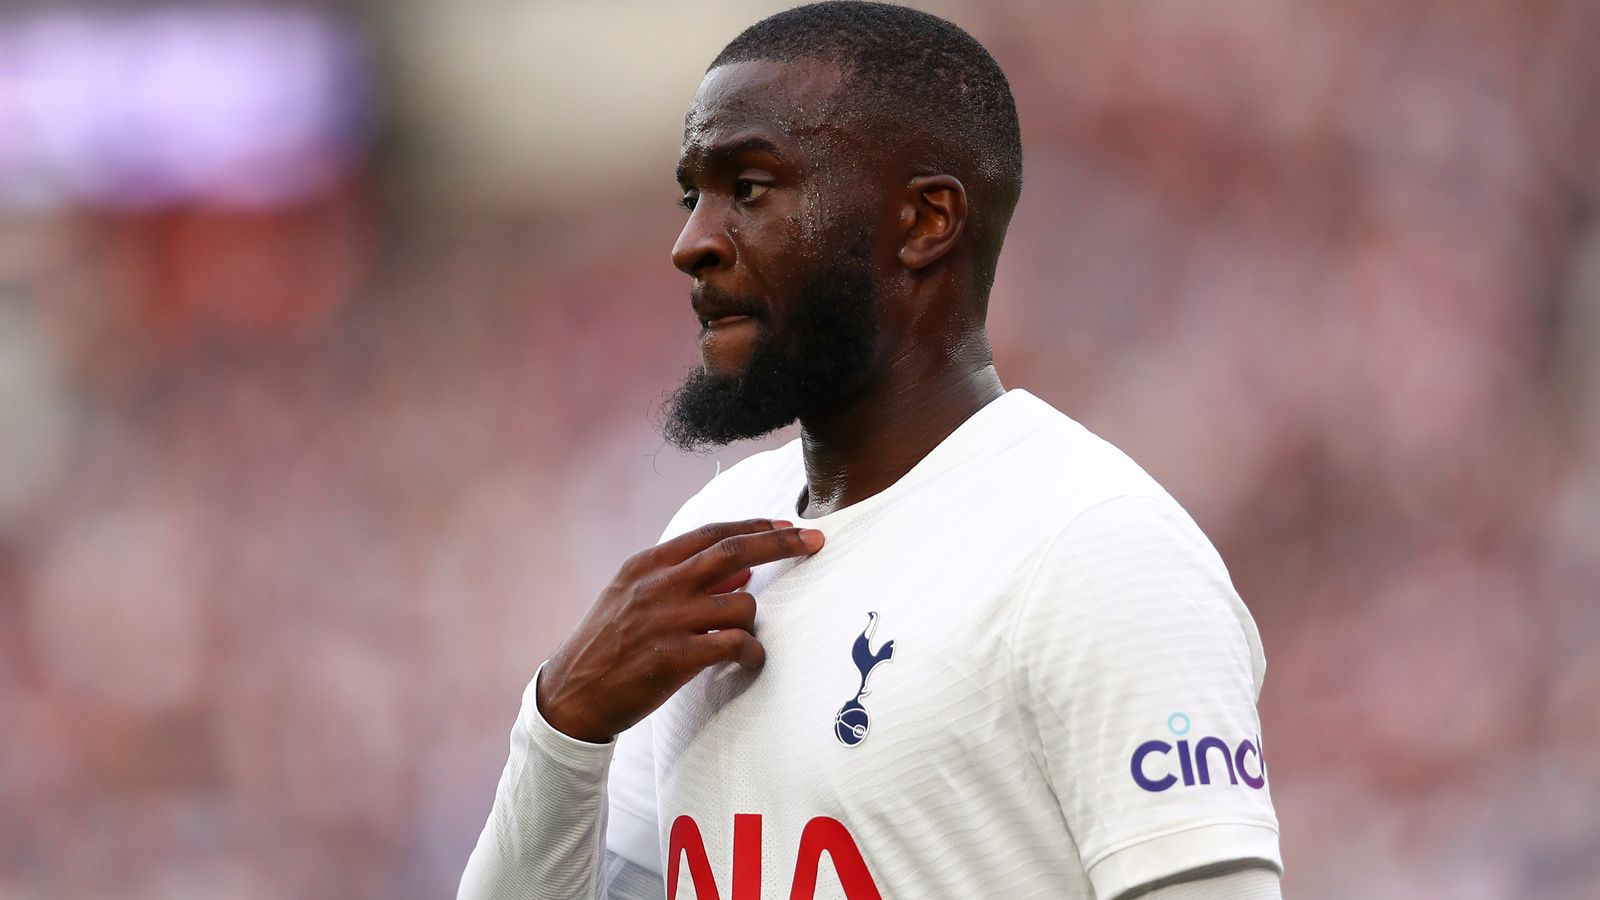 Tottenham transfer news: Antonio Conte coy on Tanguy Ndombele but says Harry Winks 'will stay'